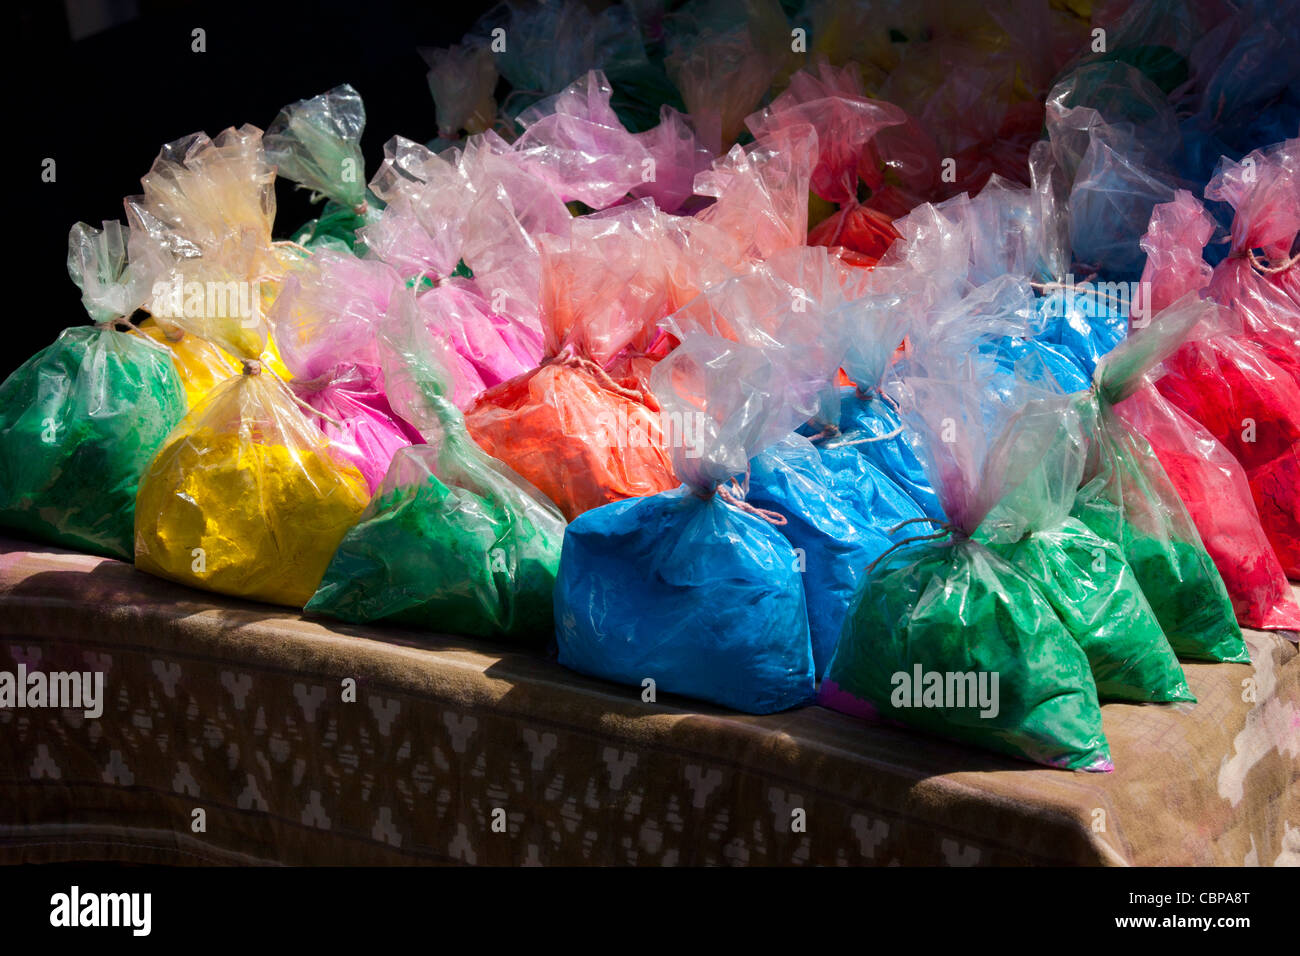 Bags of powder colours for traditional Hindu Holi festival on sale at market stall in old town Udaipur, Rajasthan, Western India Stock Photo